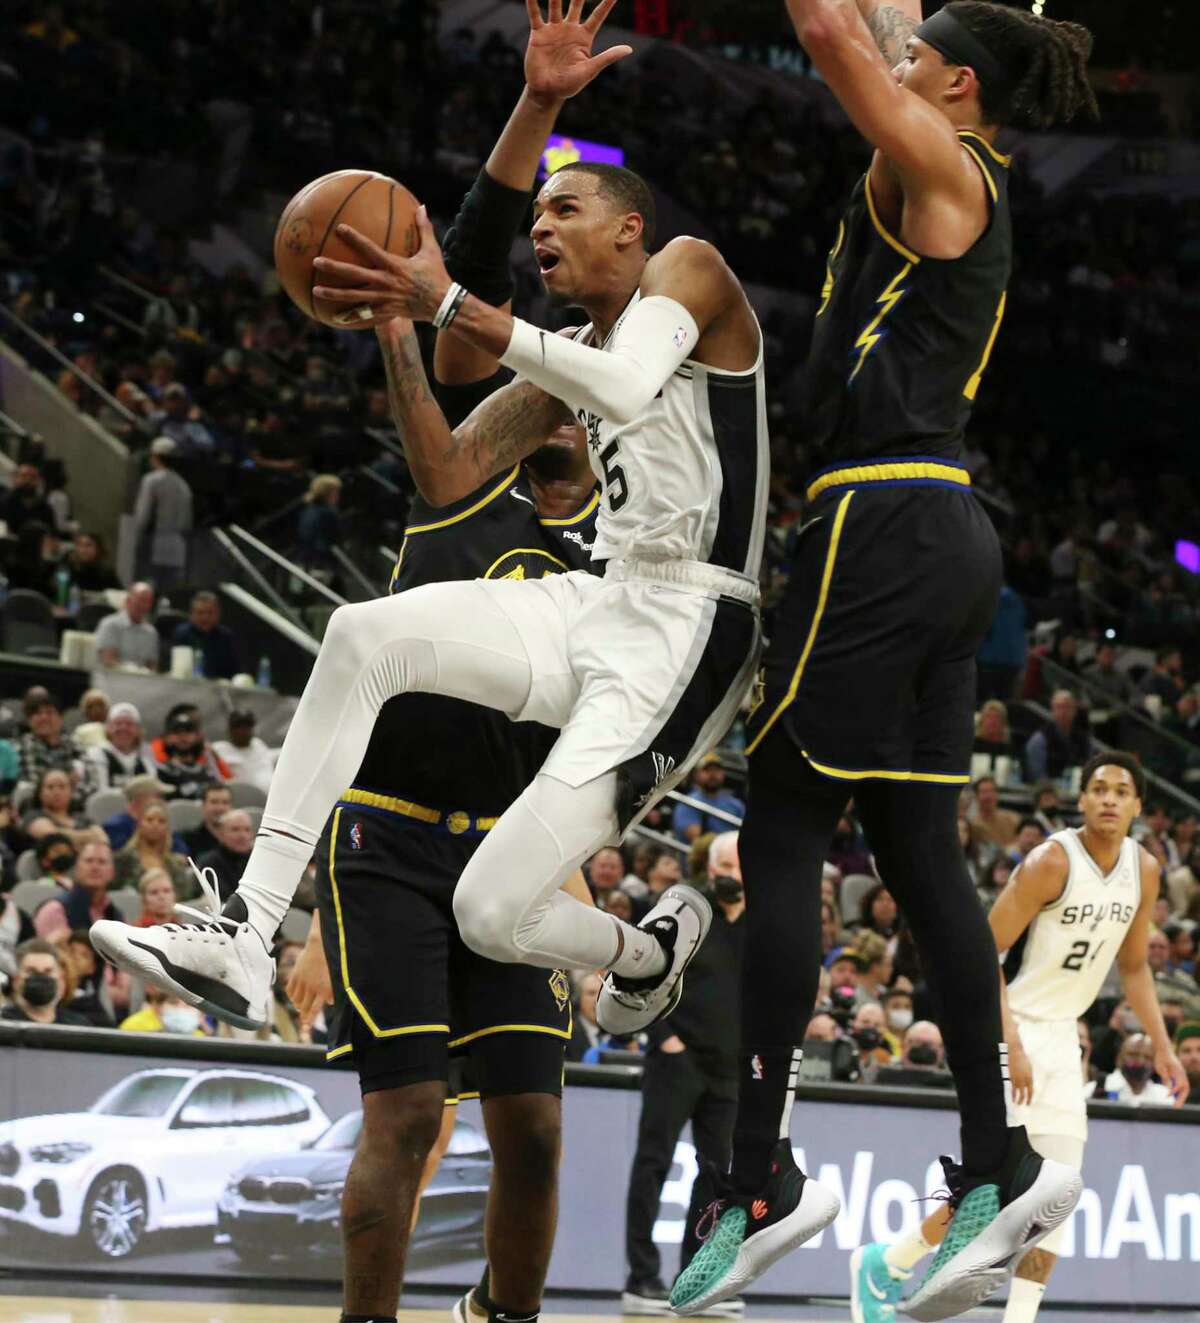 Spurs’ Dejounte Murray (5) splits a pair of Golden State Warriors for a score during the first half of the game at the AT&T Center on Tuesday, Feb. 1, 2022.